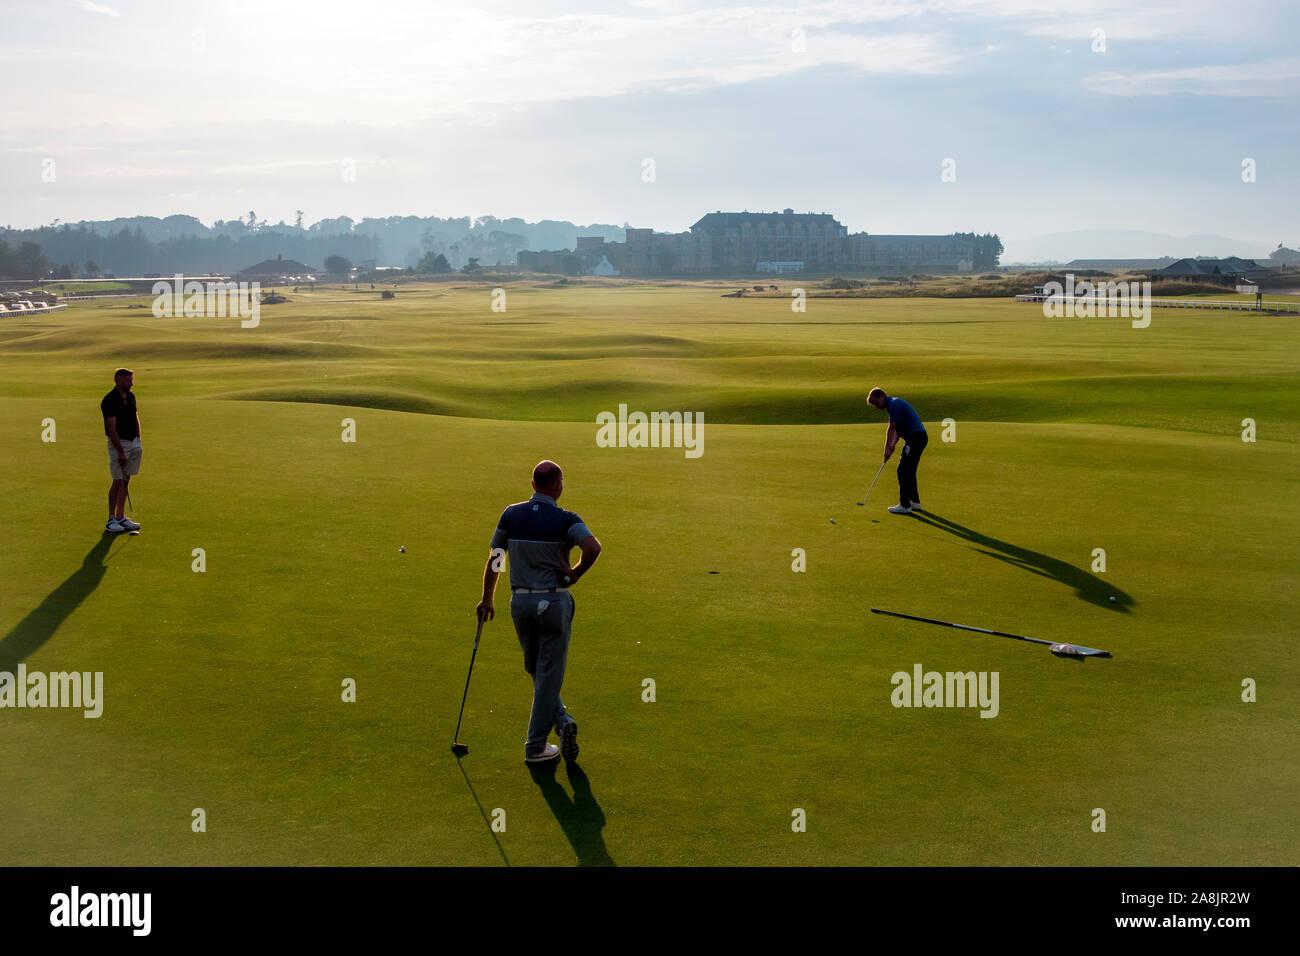 St. Andrews, Scotland/UK-24AUG2019: Golf course of St. Andrews, GOLFINO Clubhouse St. Andrews on the background. Stock Photo